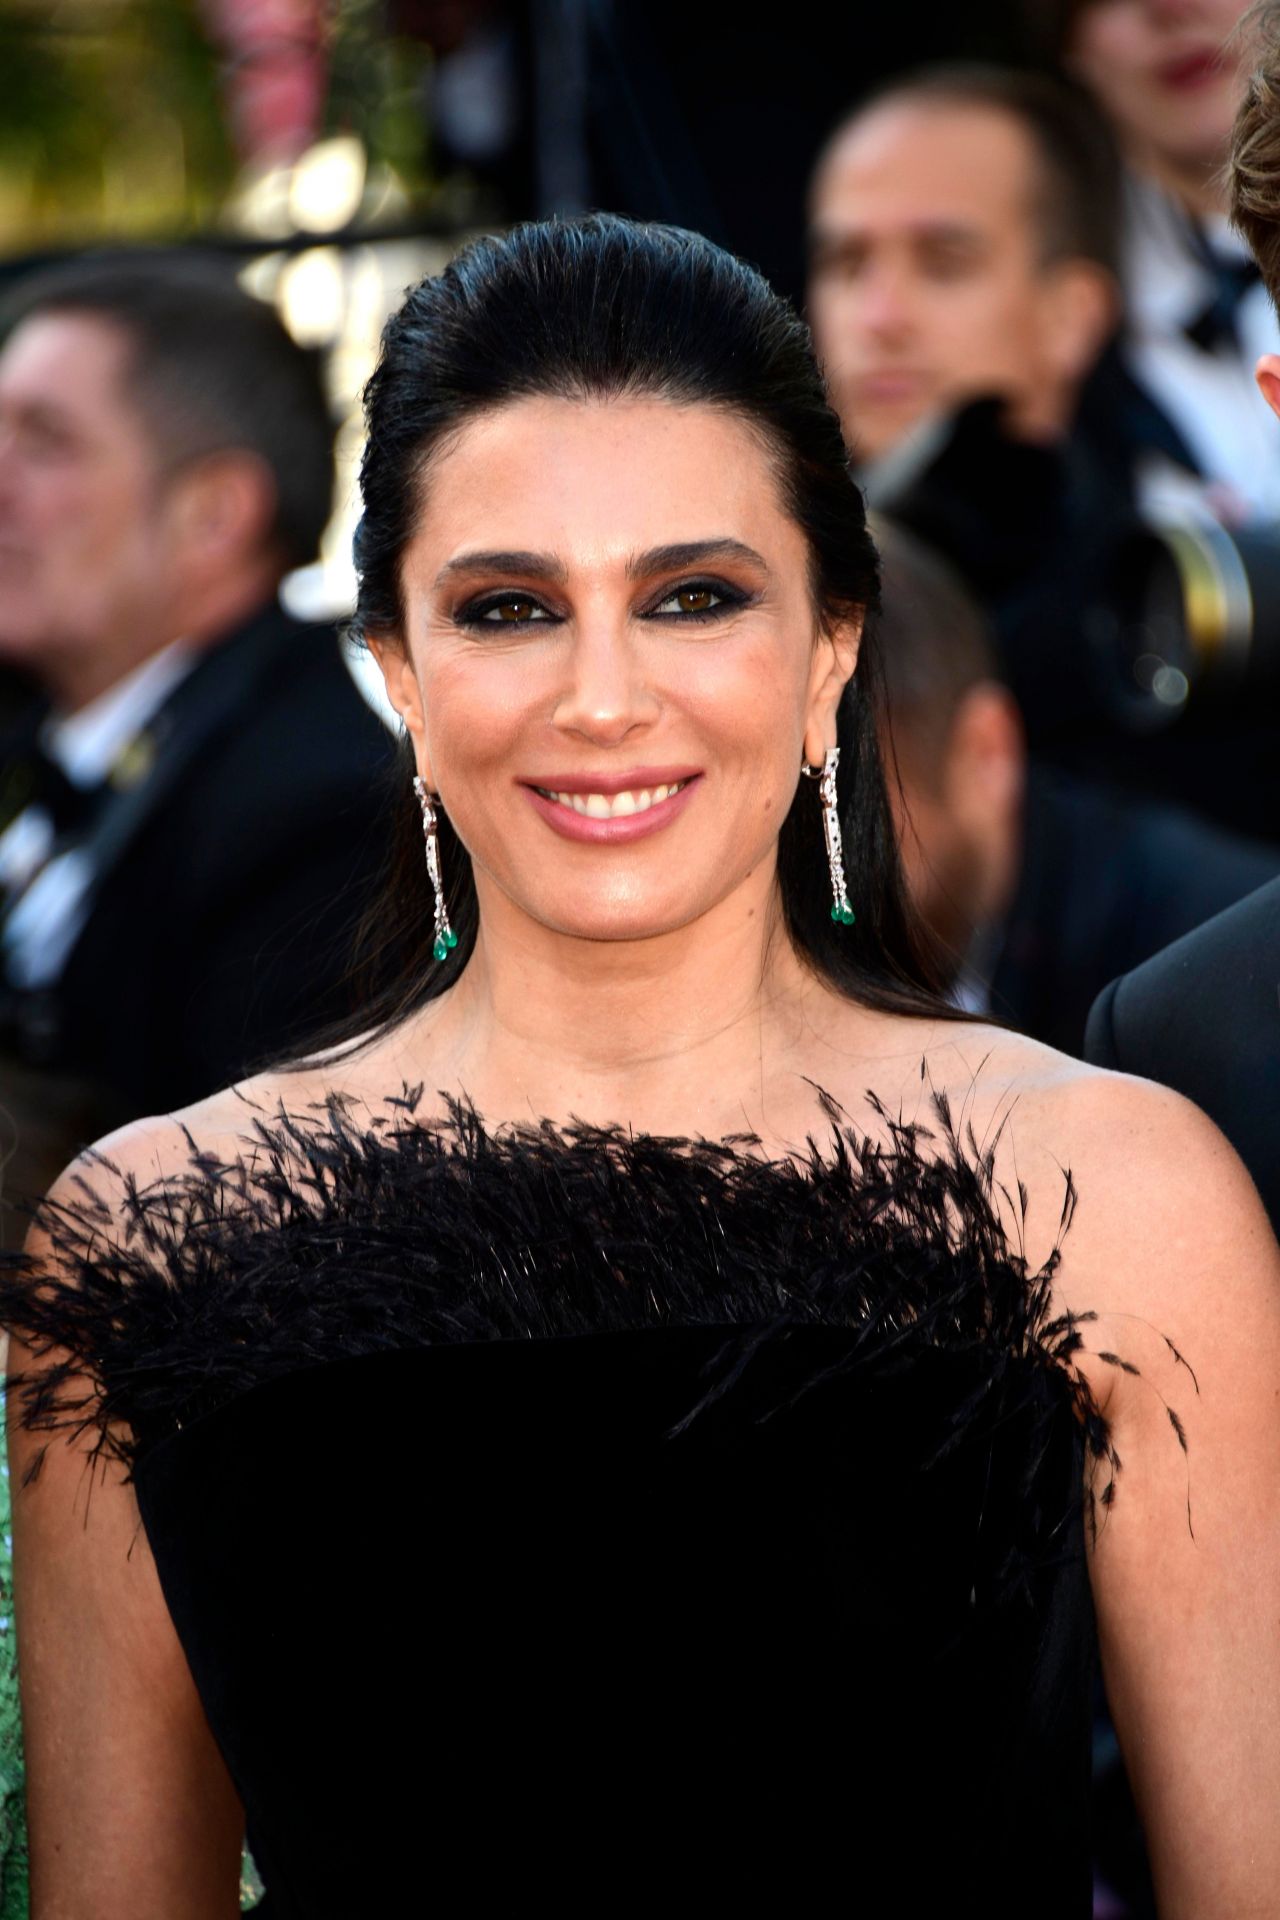 NADINE LABAKI AT LES MISERABLES RED CARPET 72ND ANNUAL CANNES FILM FESTIVAL1